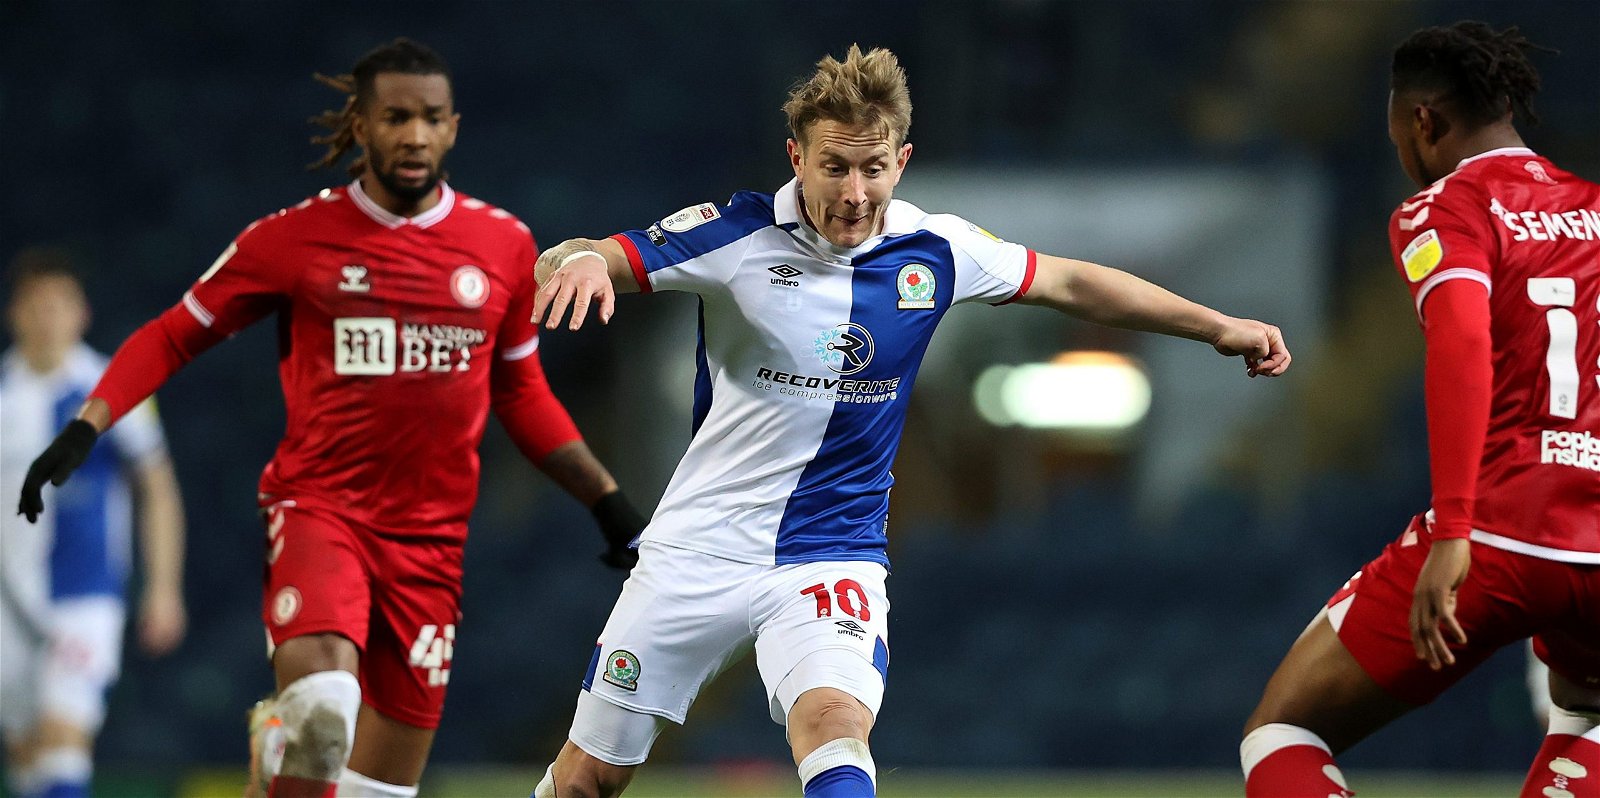 Blackburn Rovers, Blackburn Rovers boss &#8216;provides insight&#8217; into 30-y/o ace&#8217;s contract situation &#8211; expiring this summer